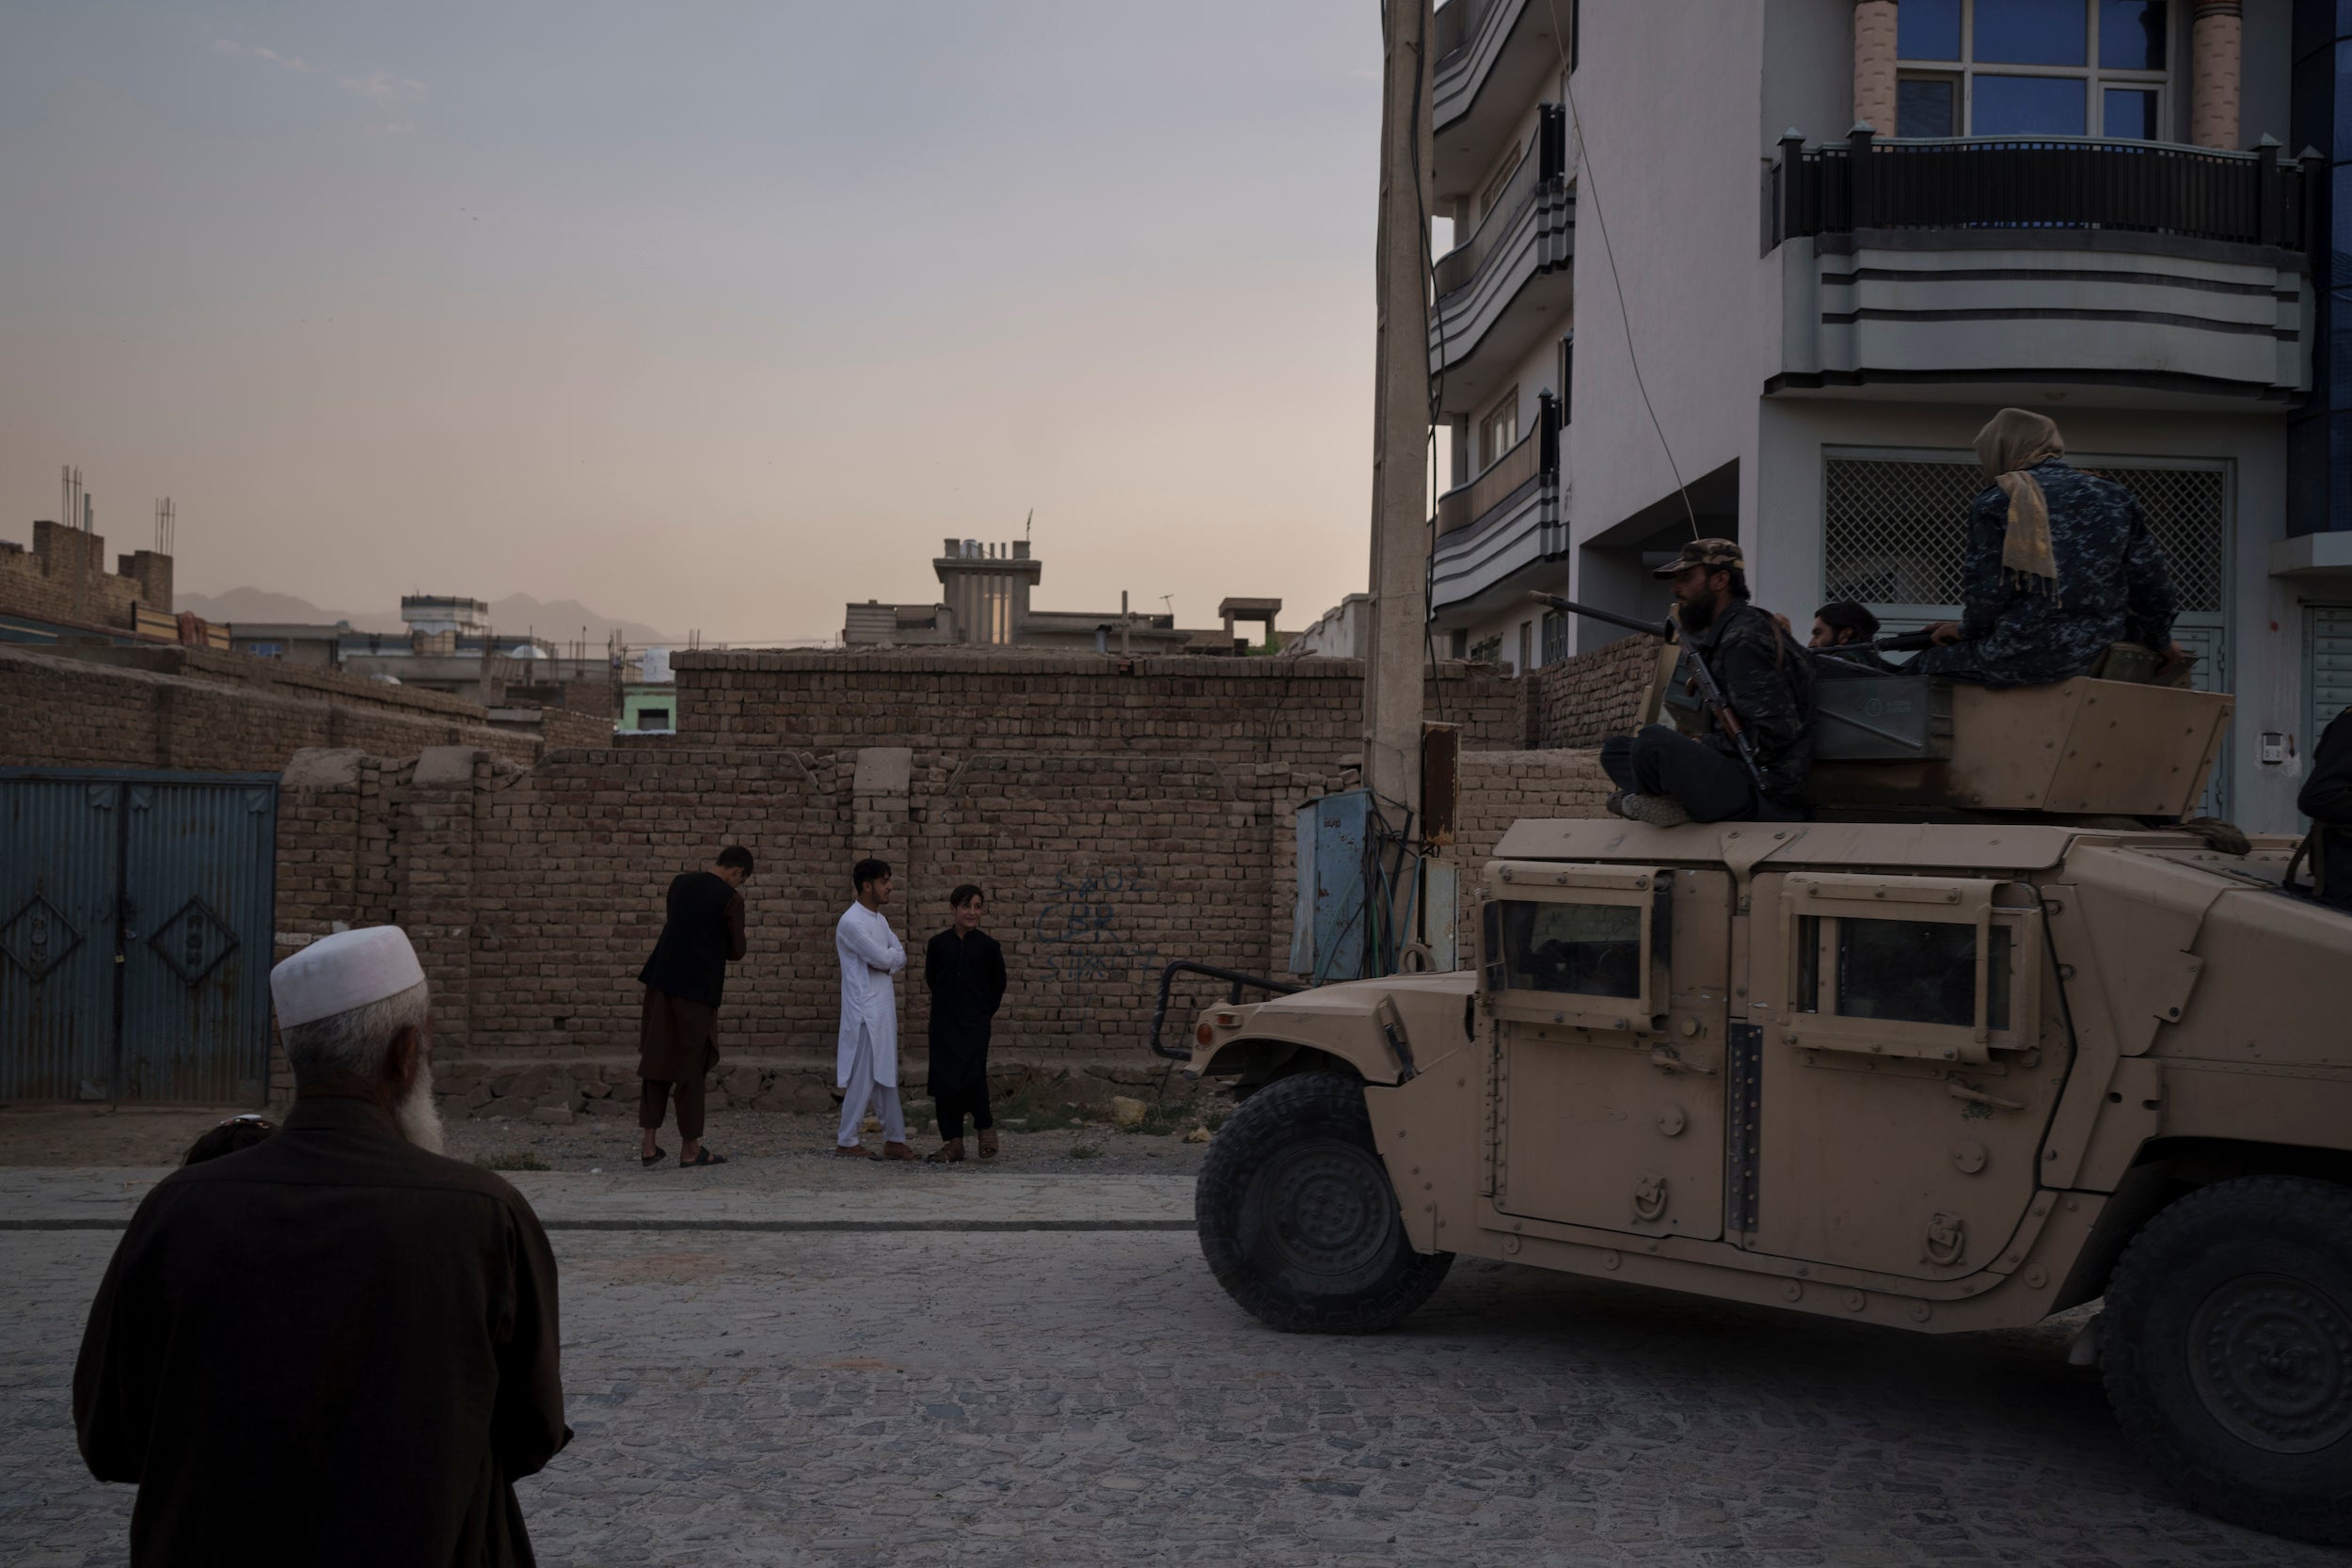 Taliban fighters ride atop a Humvee after detaining four men in Kabul, Afghanistan.